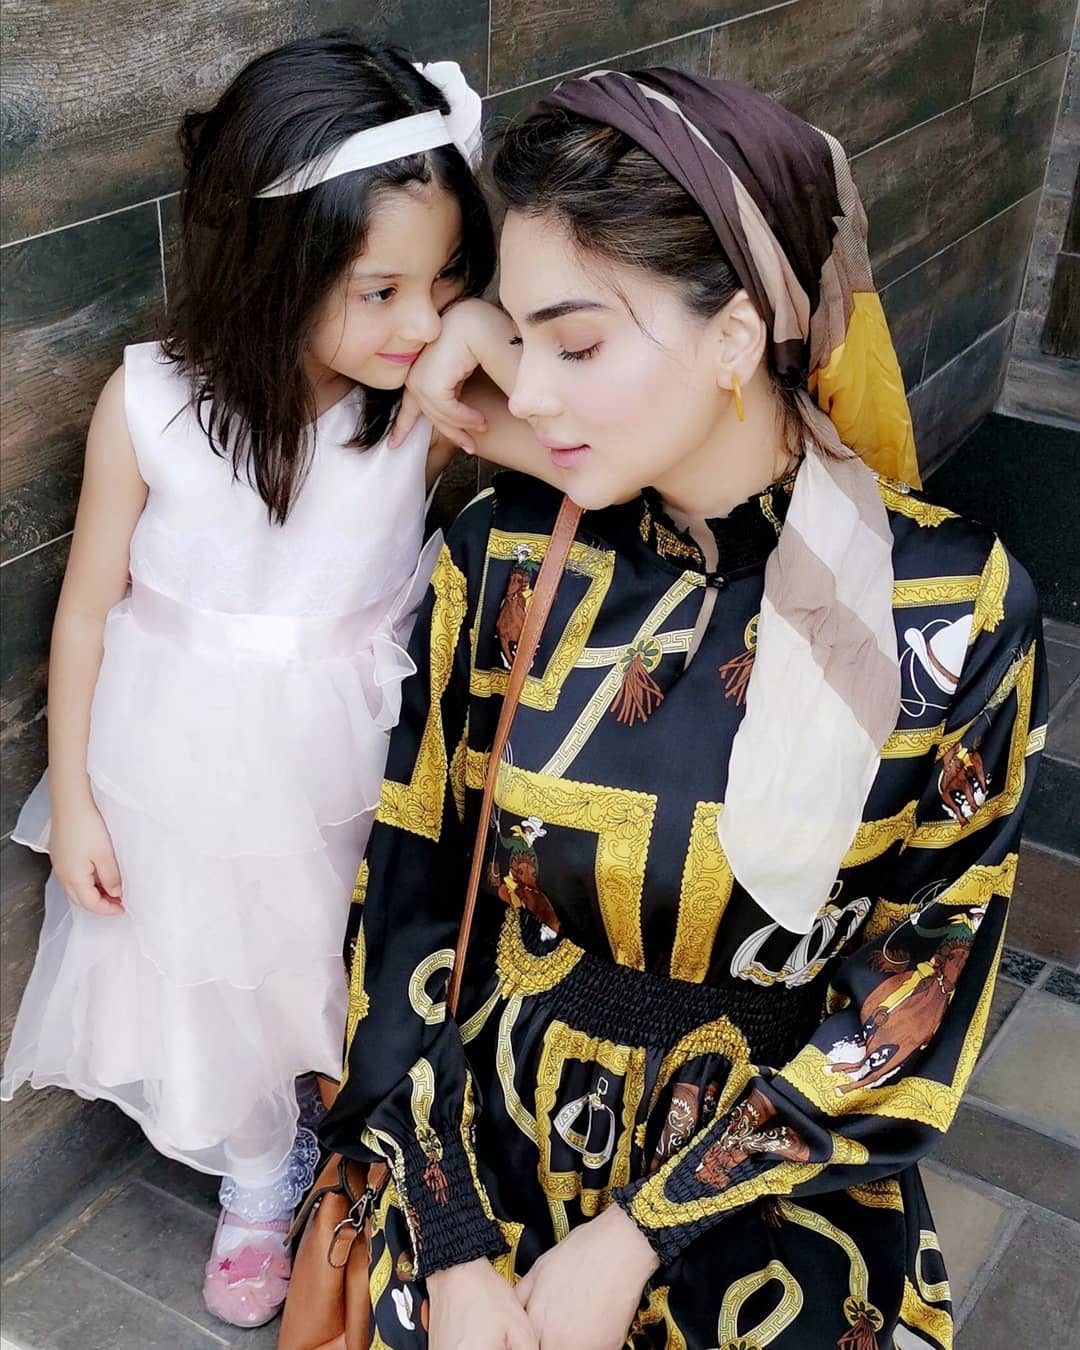 Awesome New Photos of Fiza Ali with her Daughter Faraal